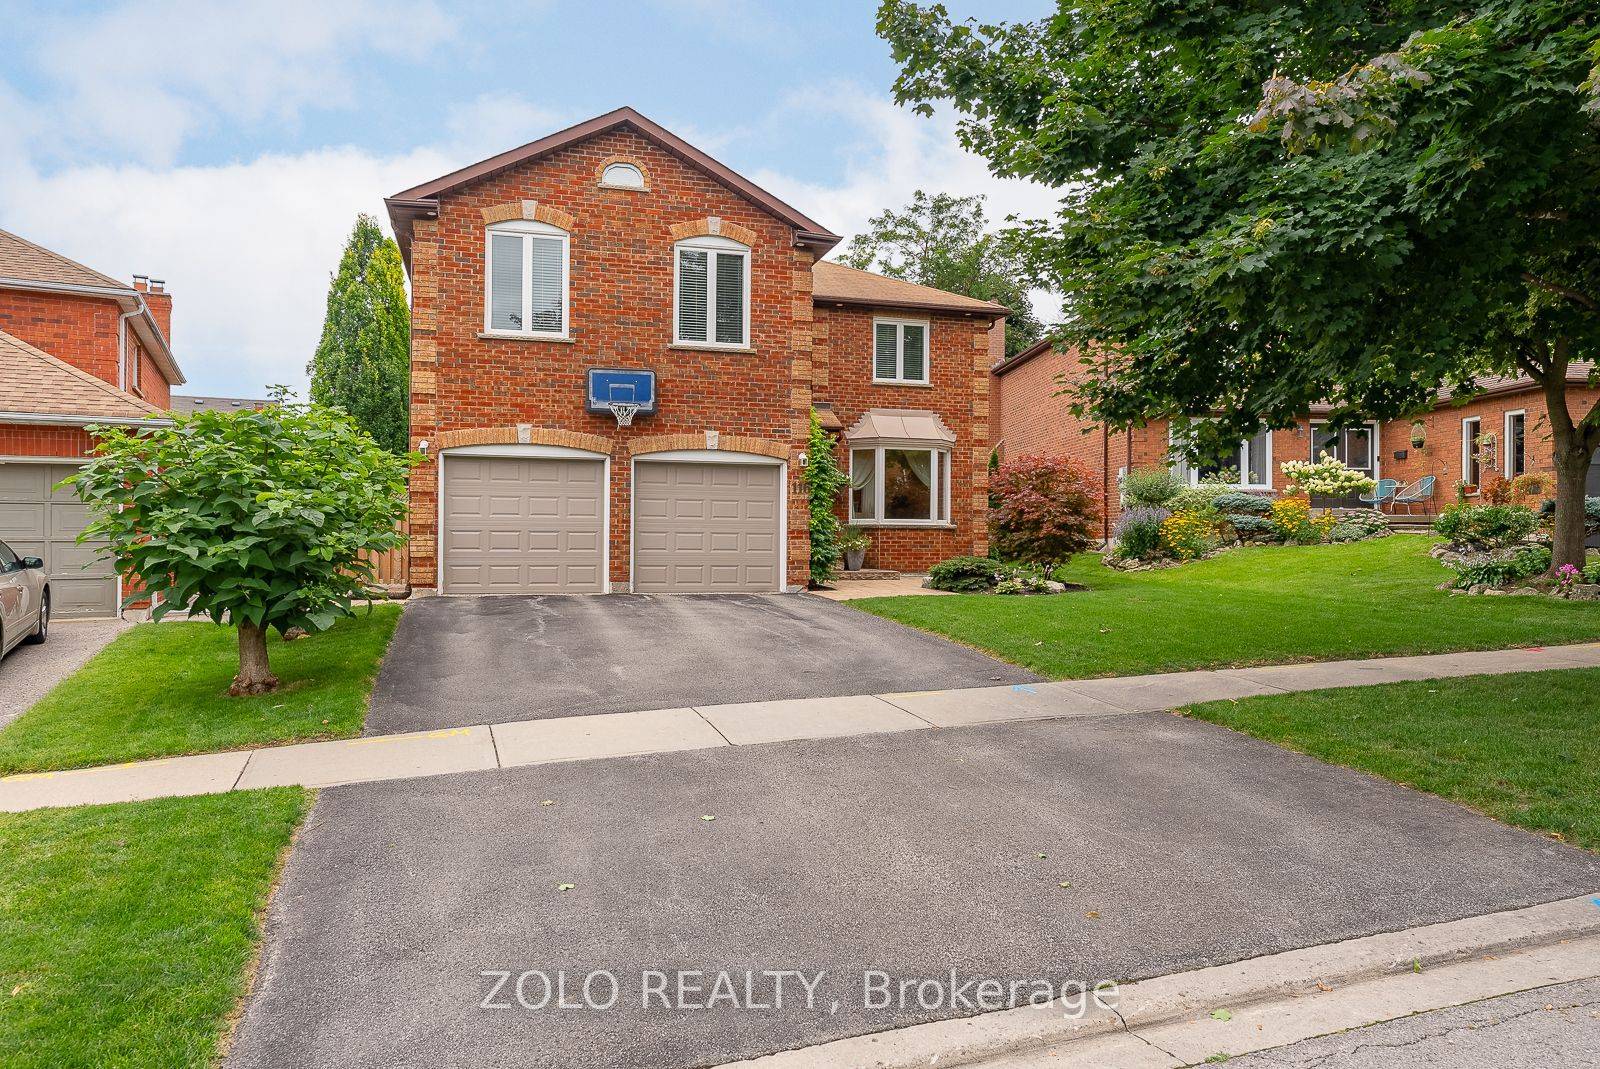 This Stunning, Executive, Detached Home Offers approximately 4, 400 sqft of finished living space ; All On A Pie Shaped Lot In The Sought After Armitage Community Near Yonge St ...